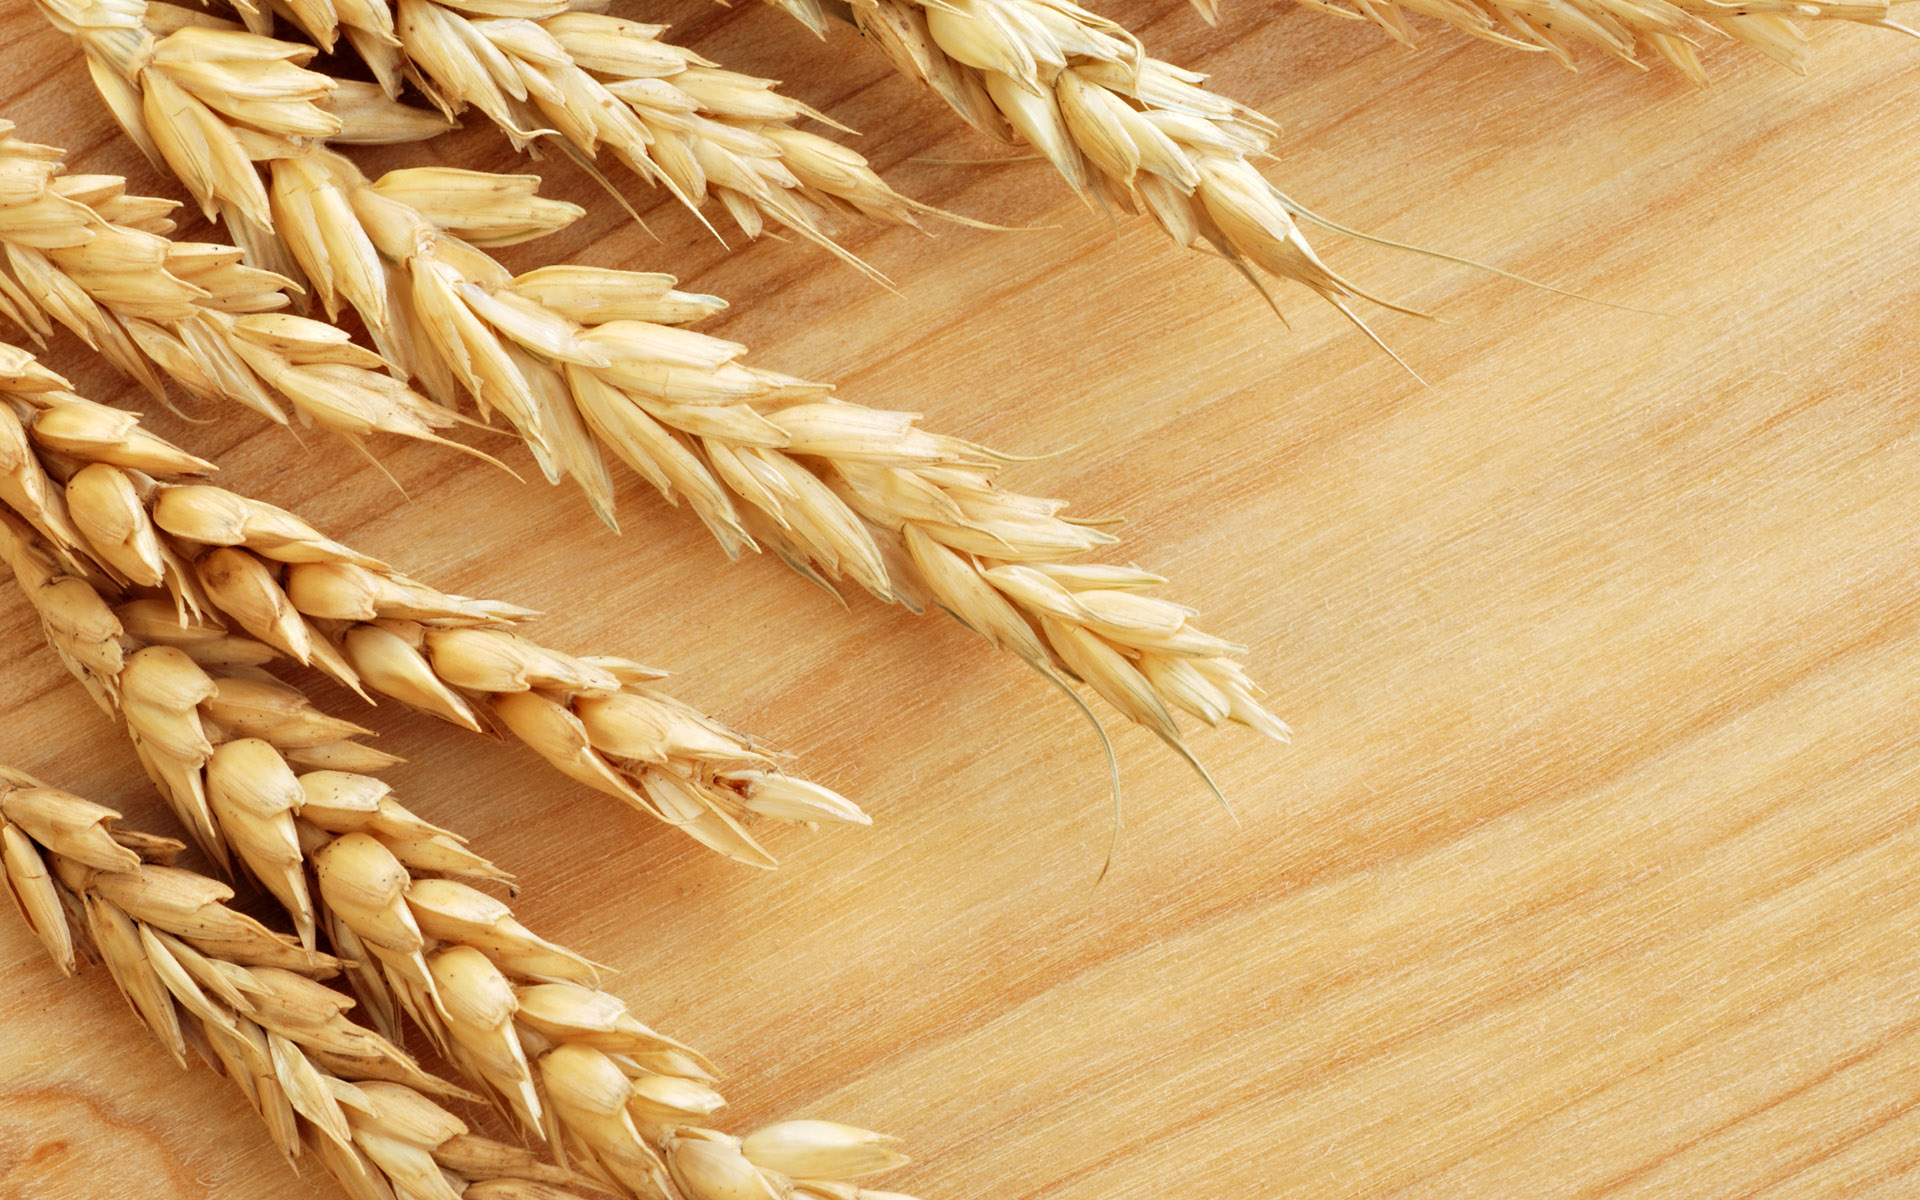 Wheat requirement in the US will increase manifold by 2050 to meet the demands of the growing population, especially since wheat is largely considered to be ...